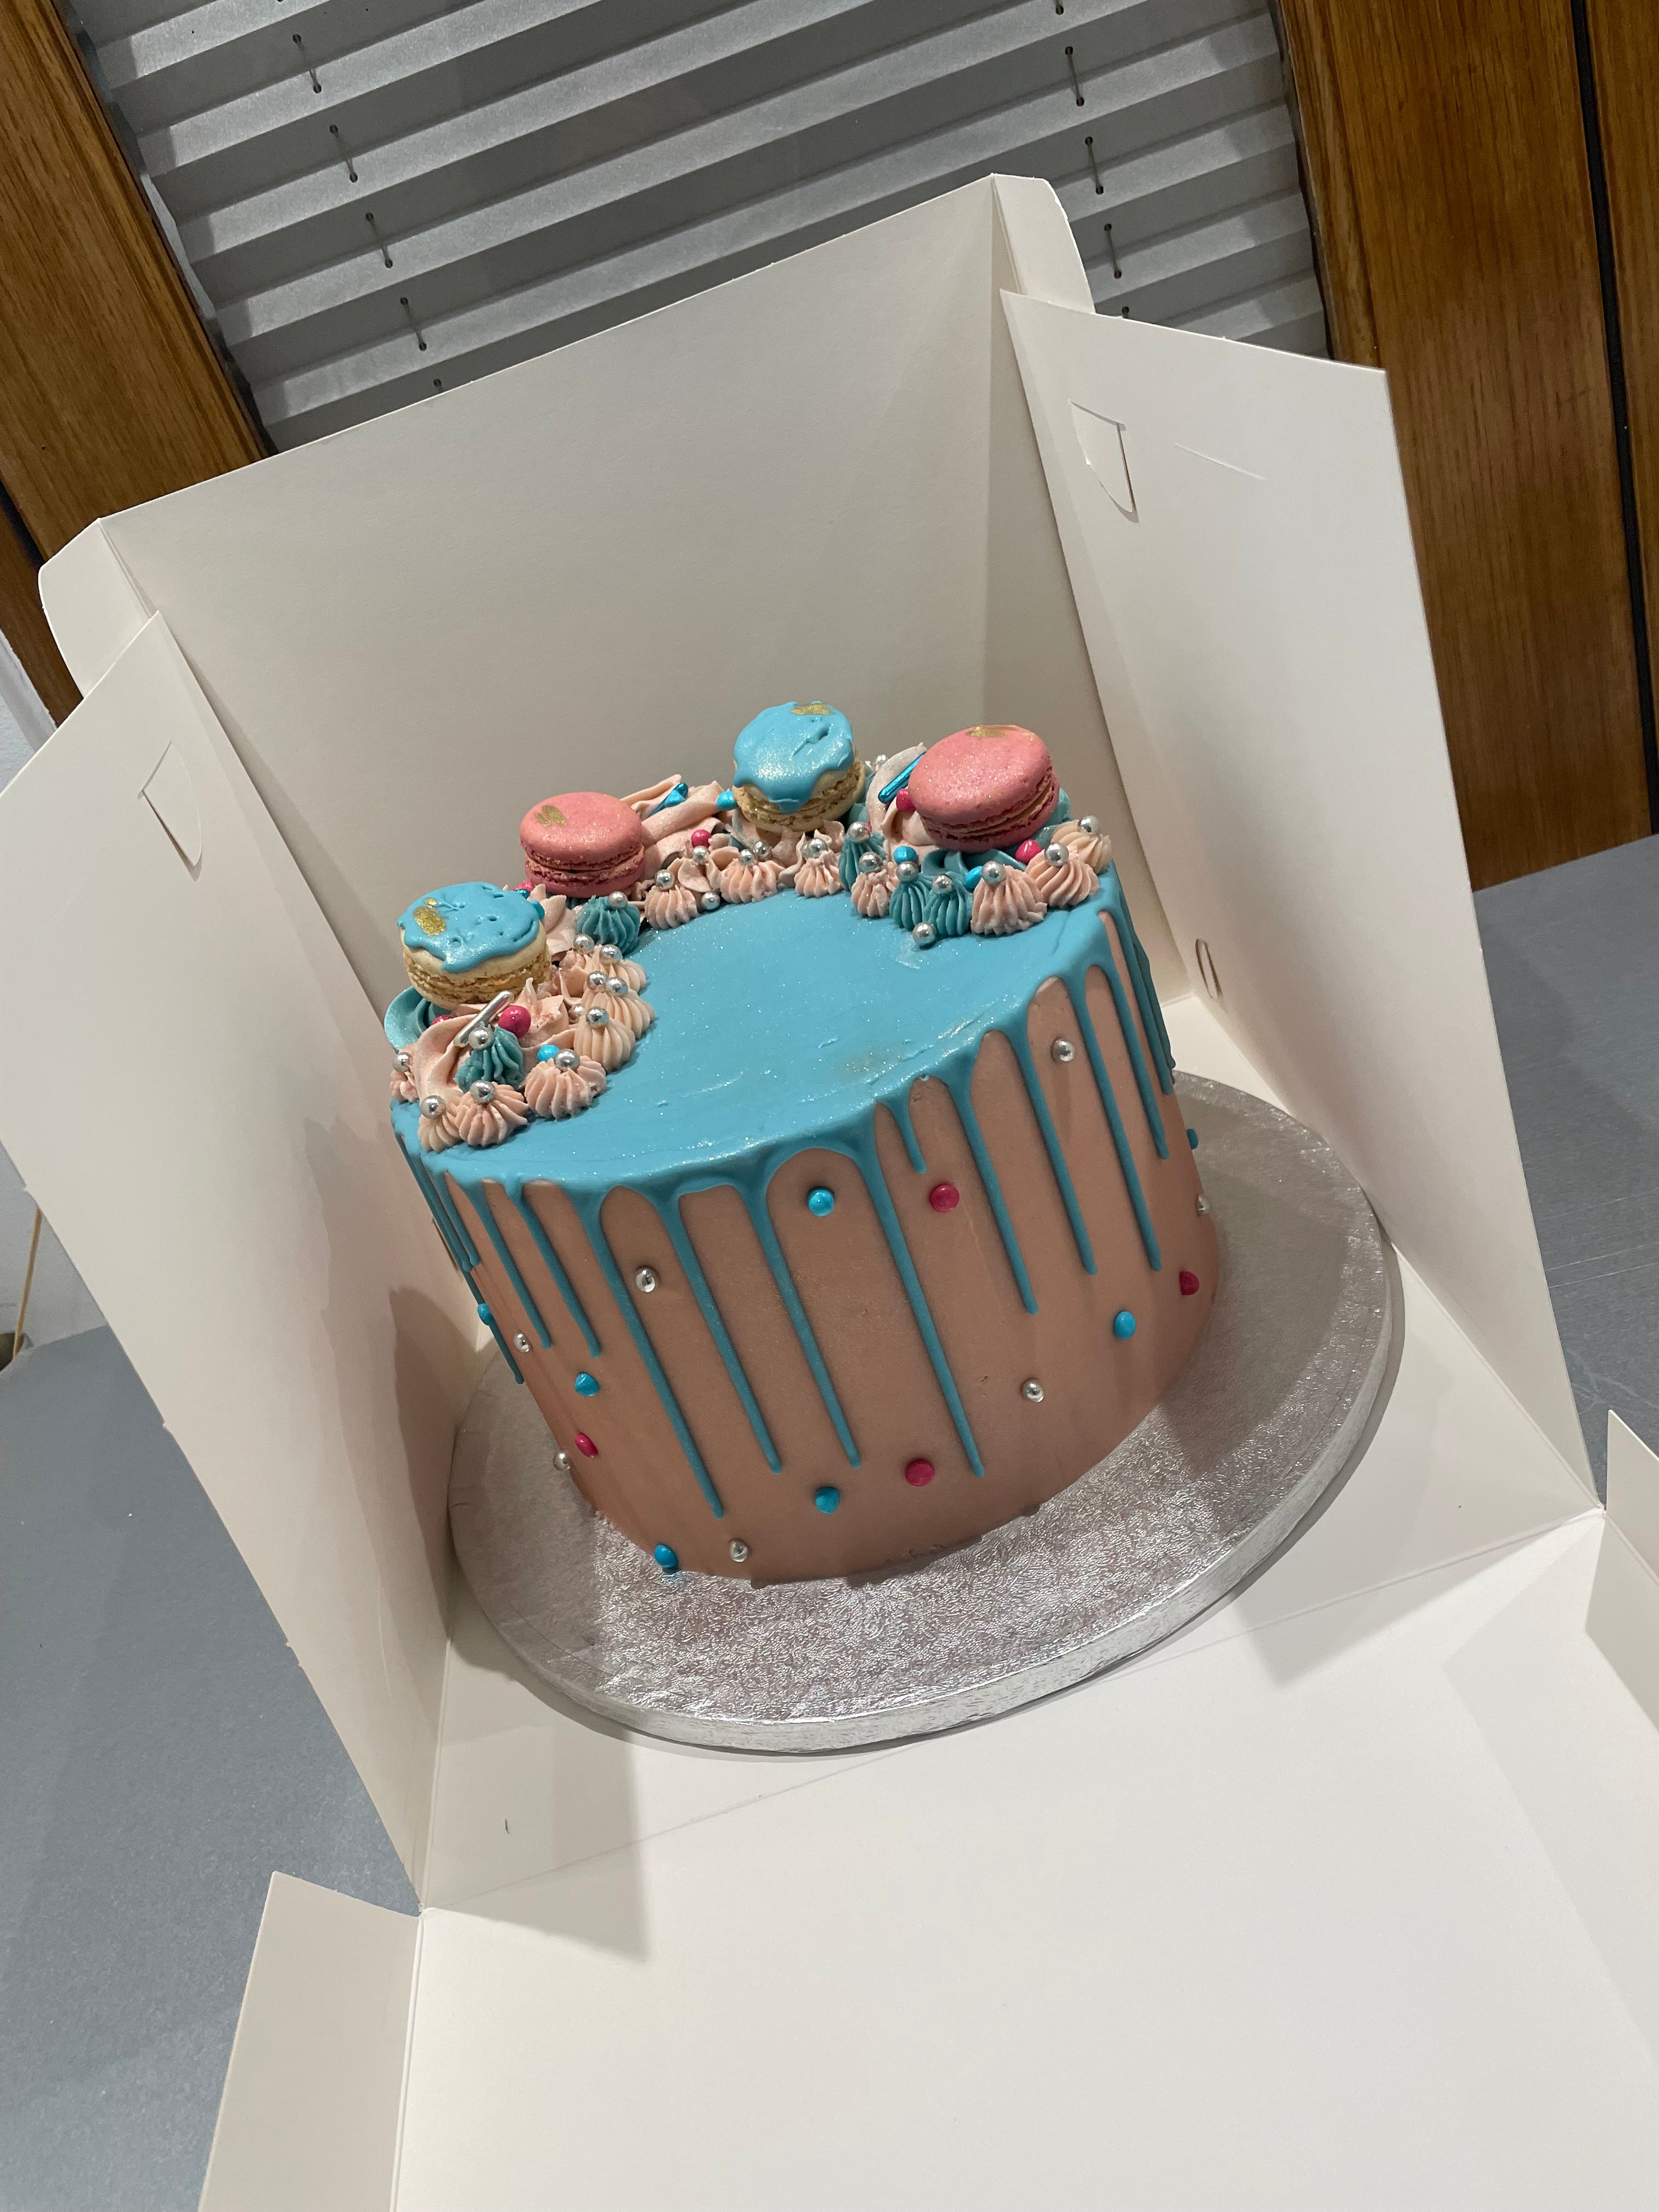 AZURE AND PINK GENDER REVEAL CAKE